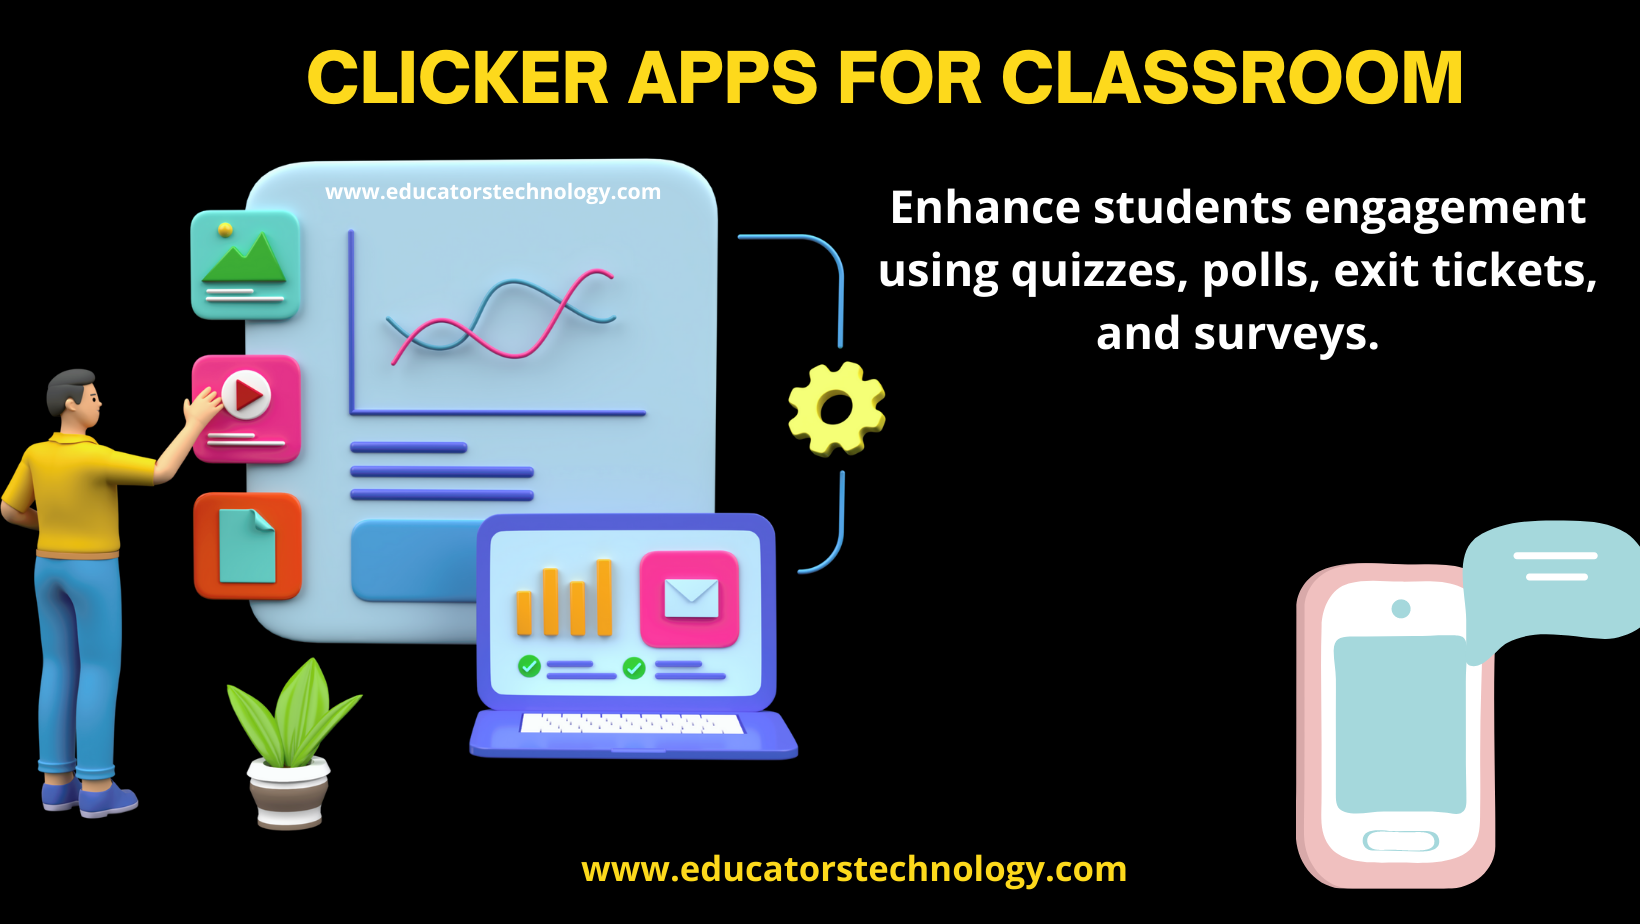 Clickers - All In Learning